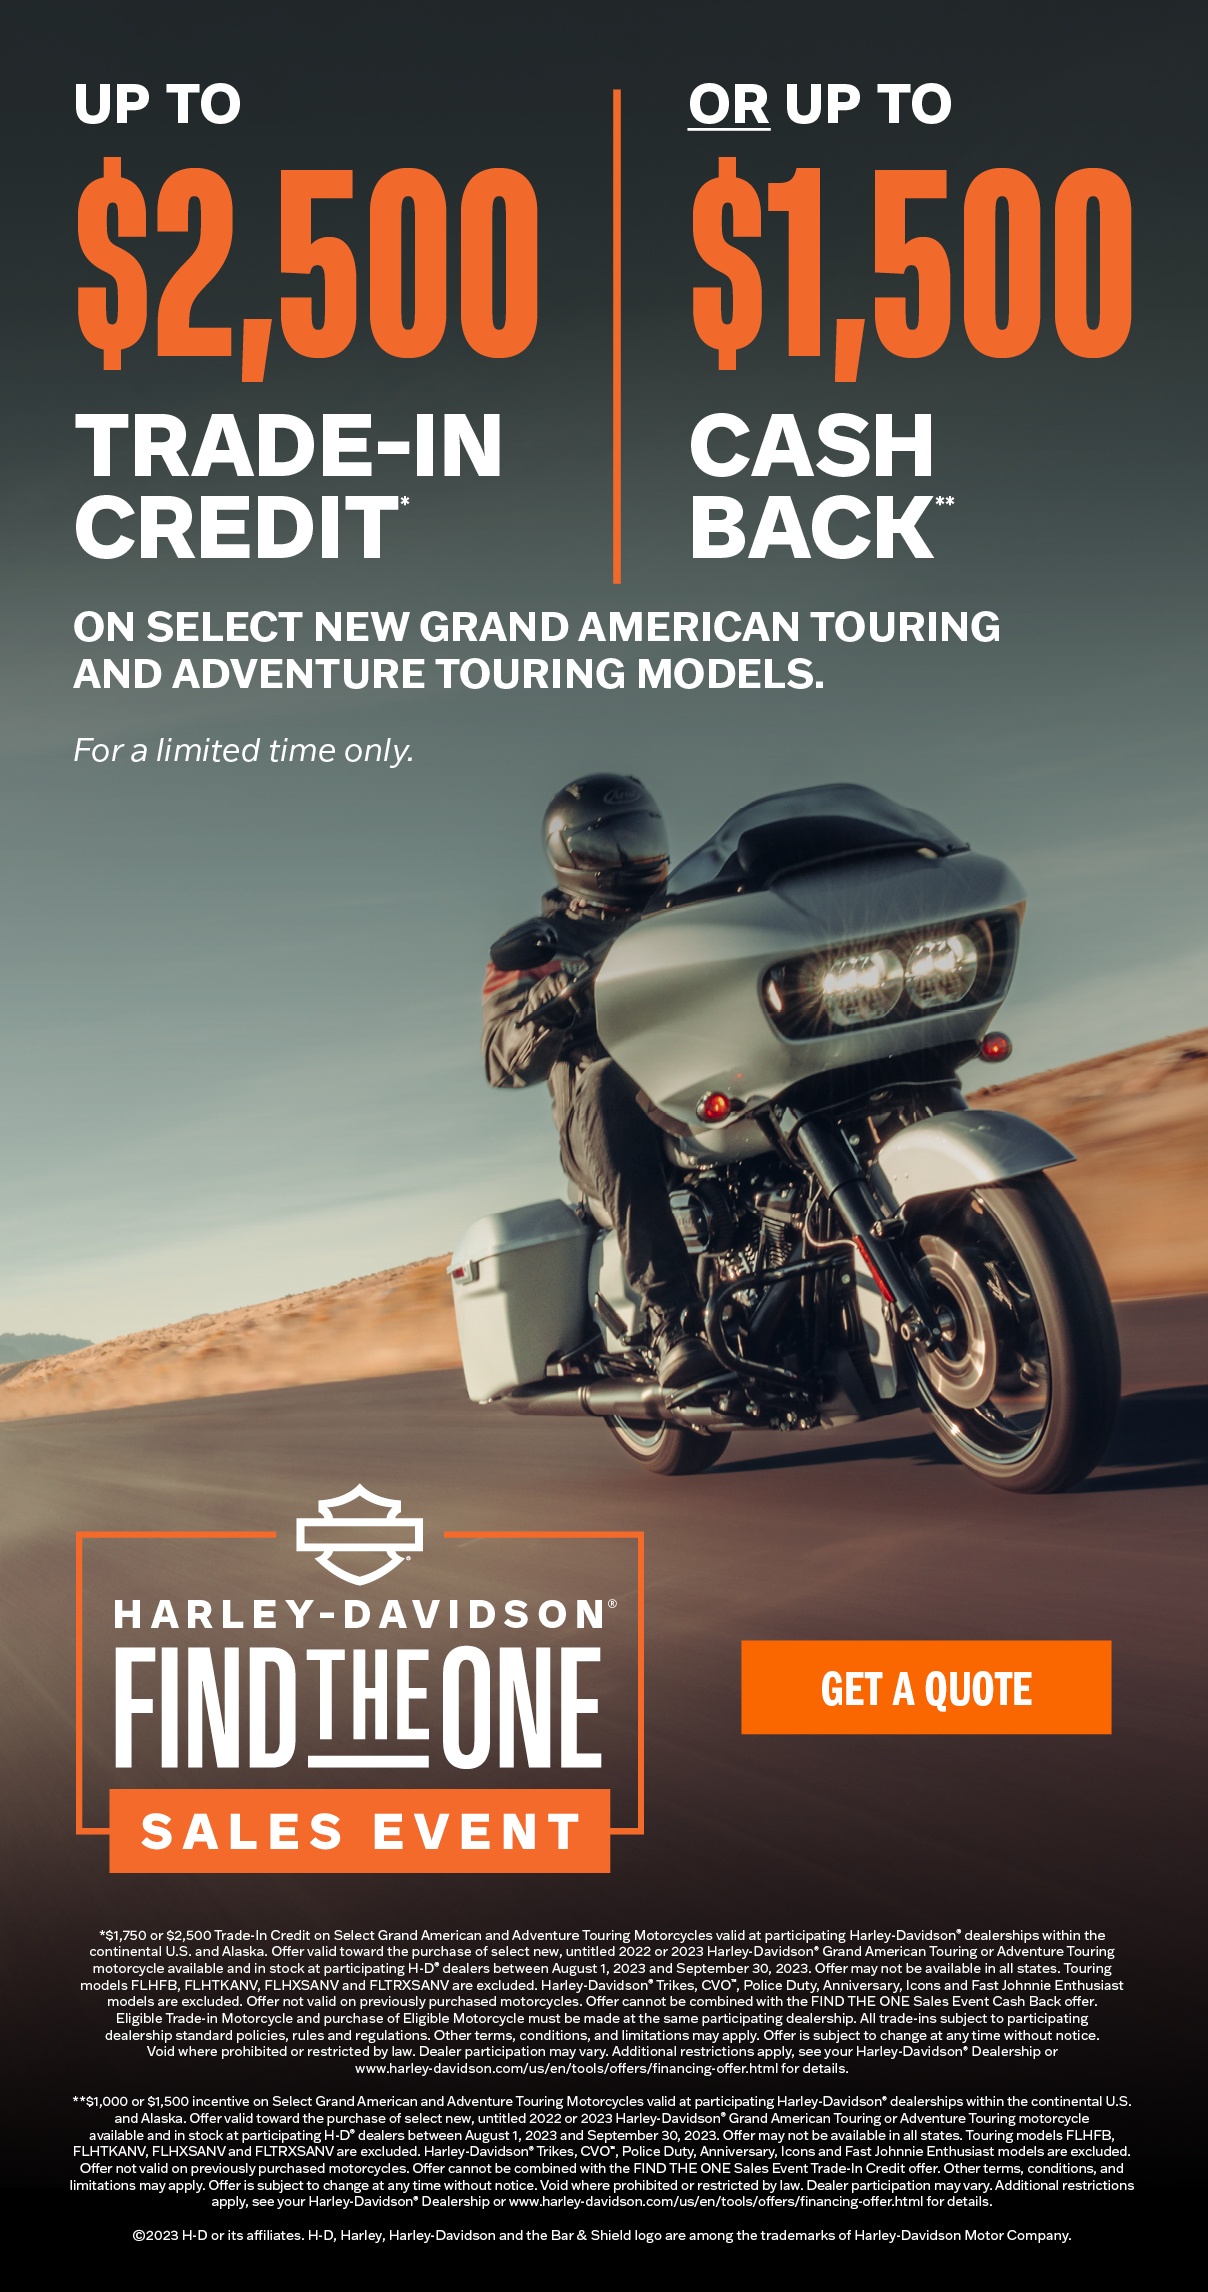 Find the One Sales event at Faribault Harley-Davidson